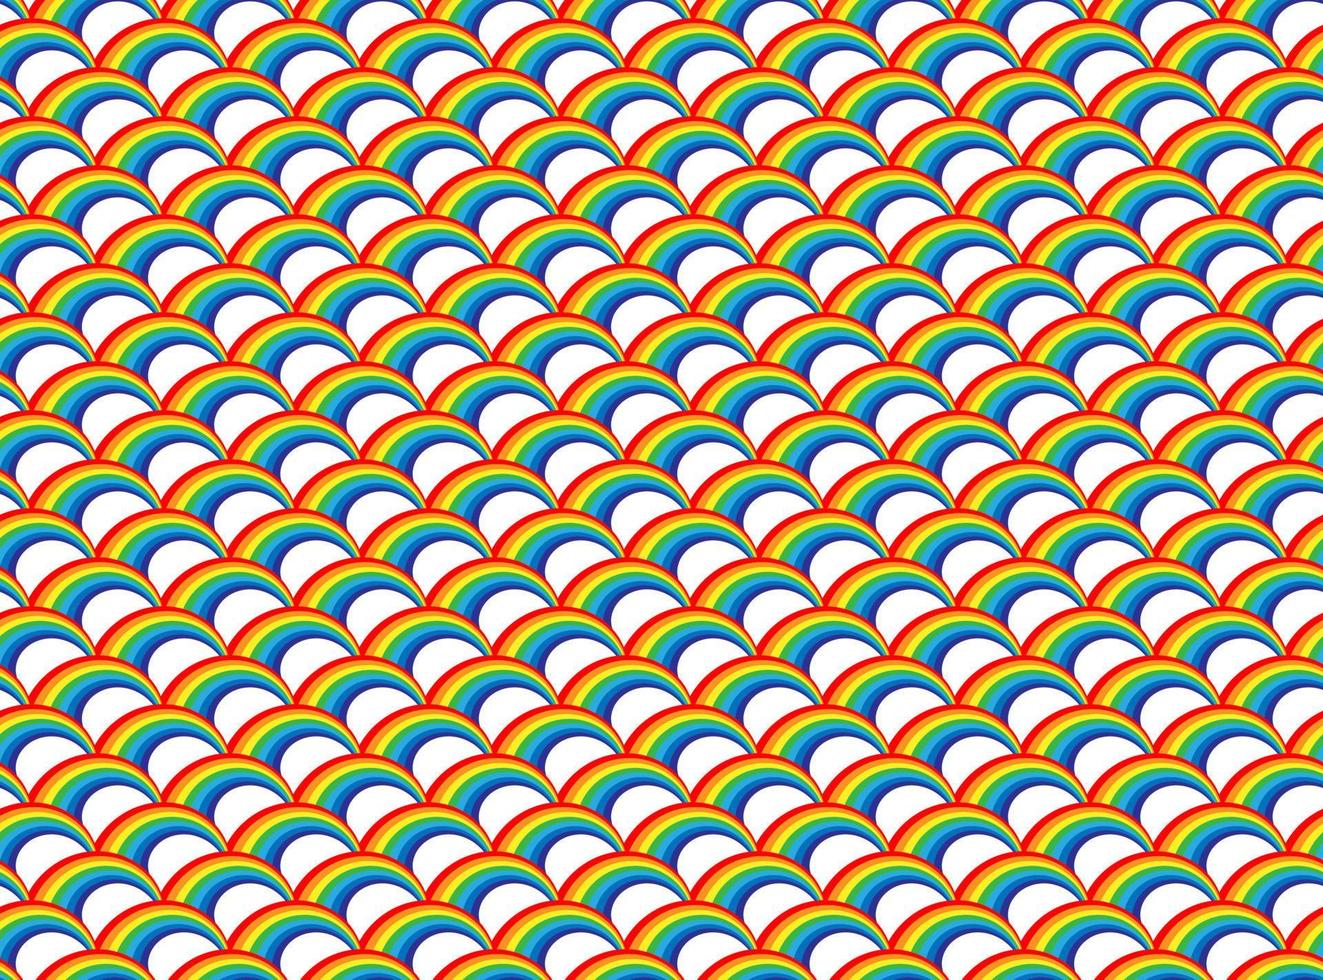 Rainbow pattern seamless. Colorful background vector texture design. Abstract cartoon stripes wallpaper.